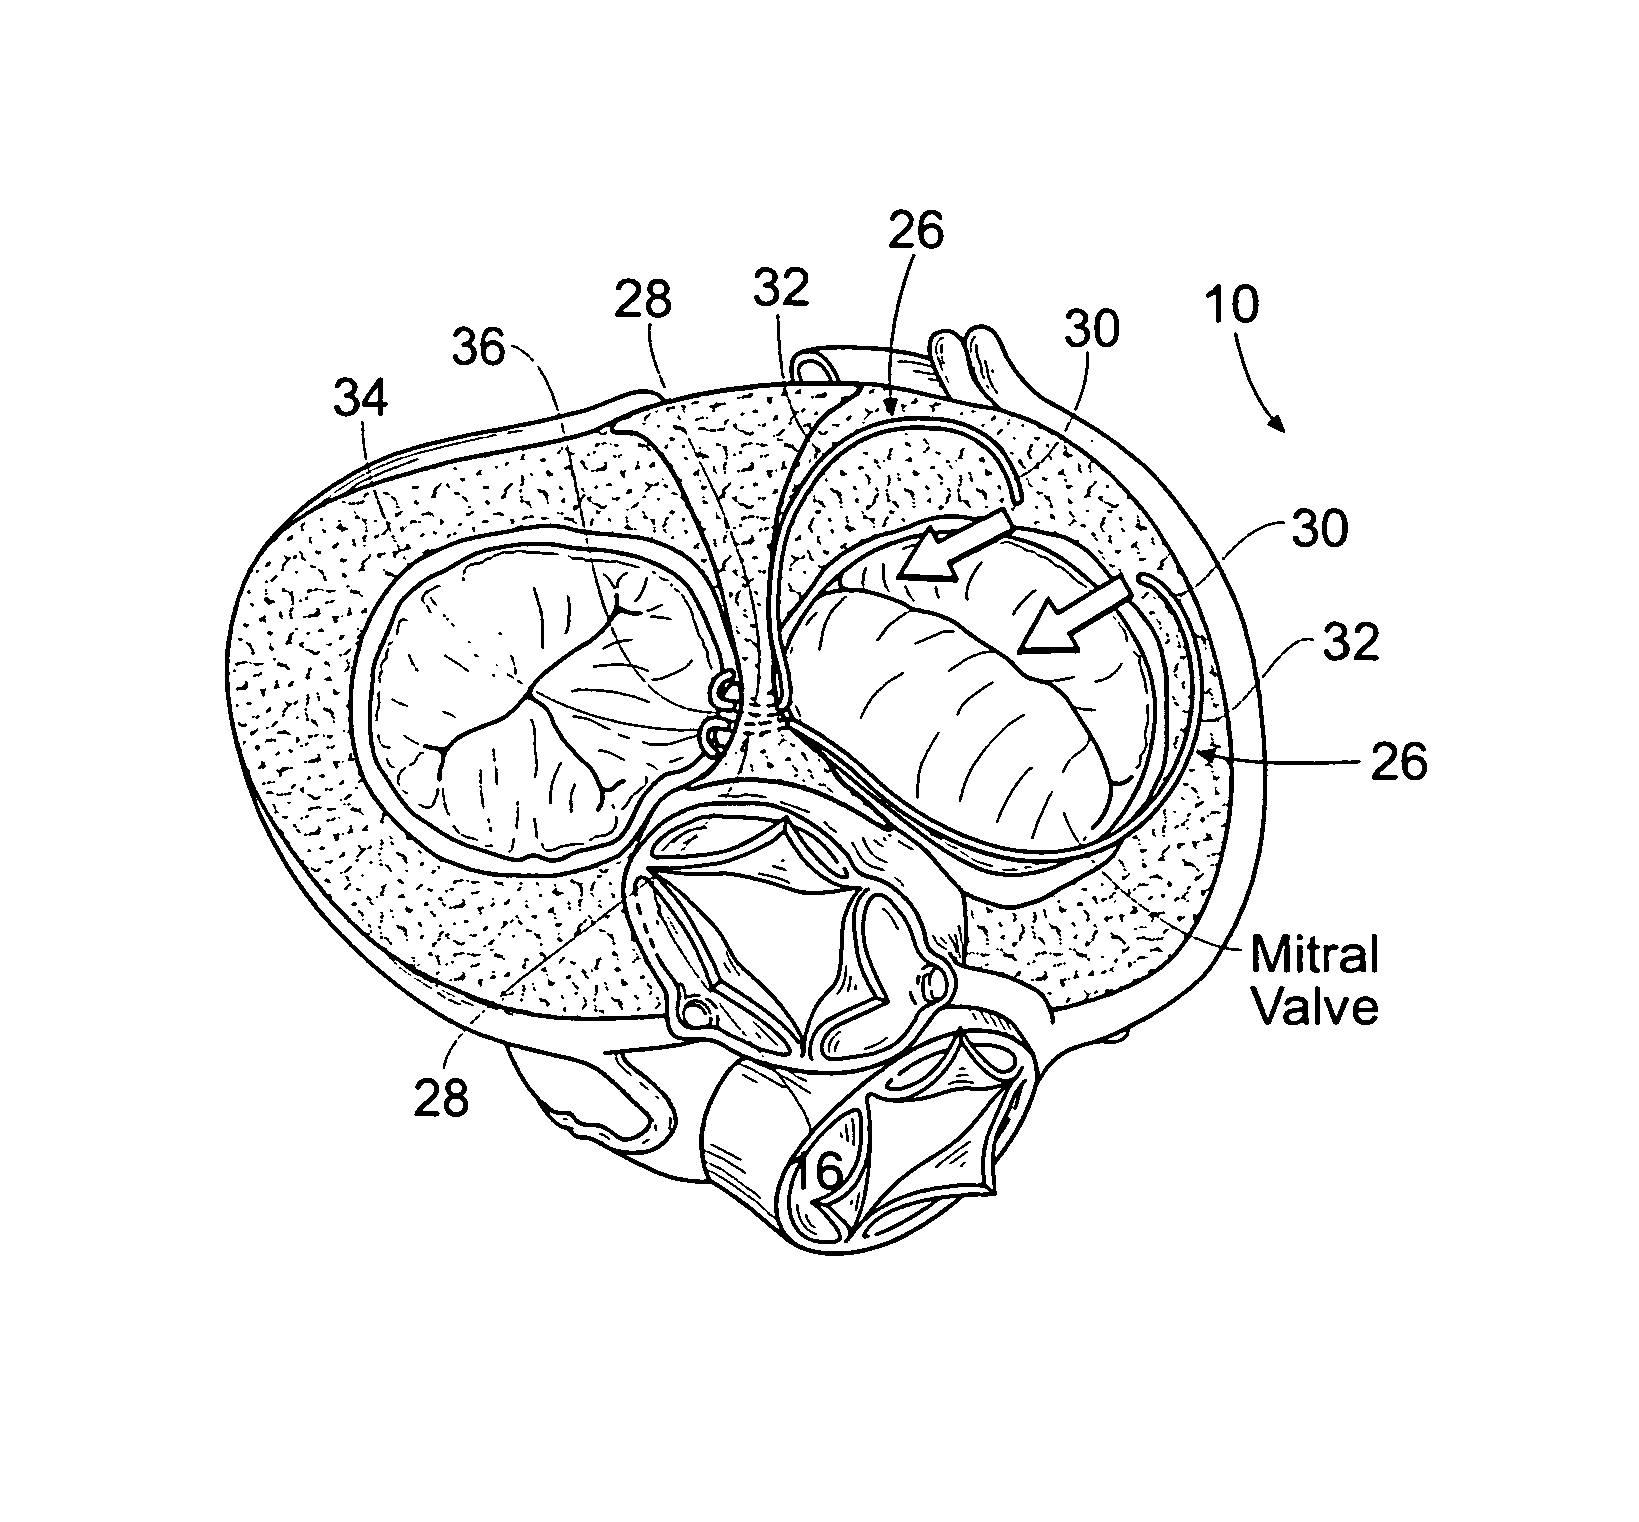 Method of reshaping a heart valve annulus using an intravascular device